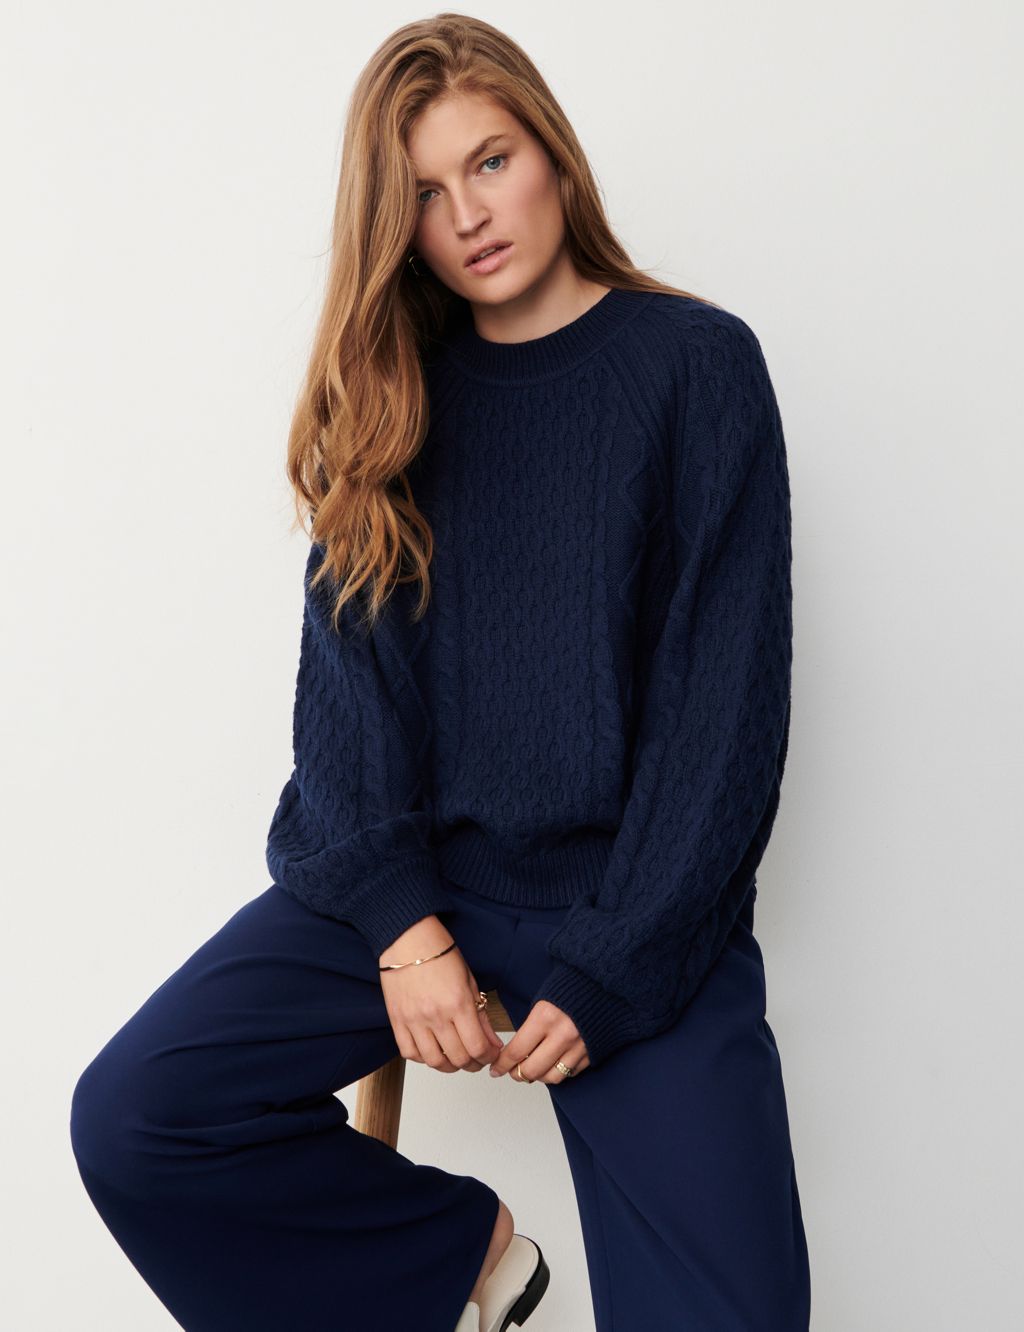 Cable Knit Jumper with Merino Wool image 1